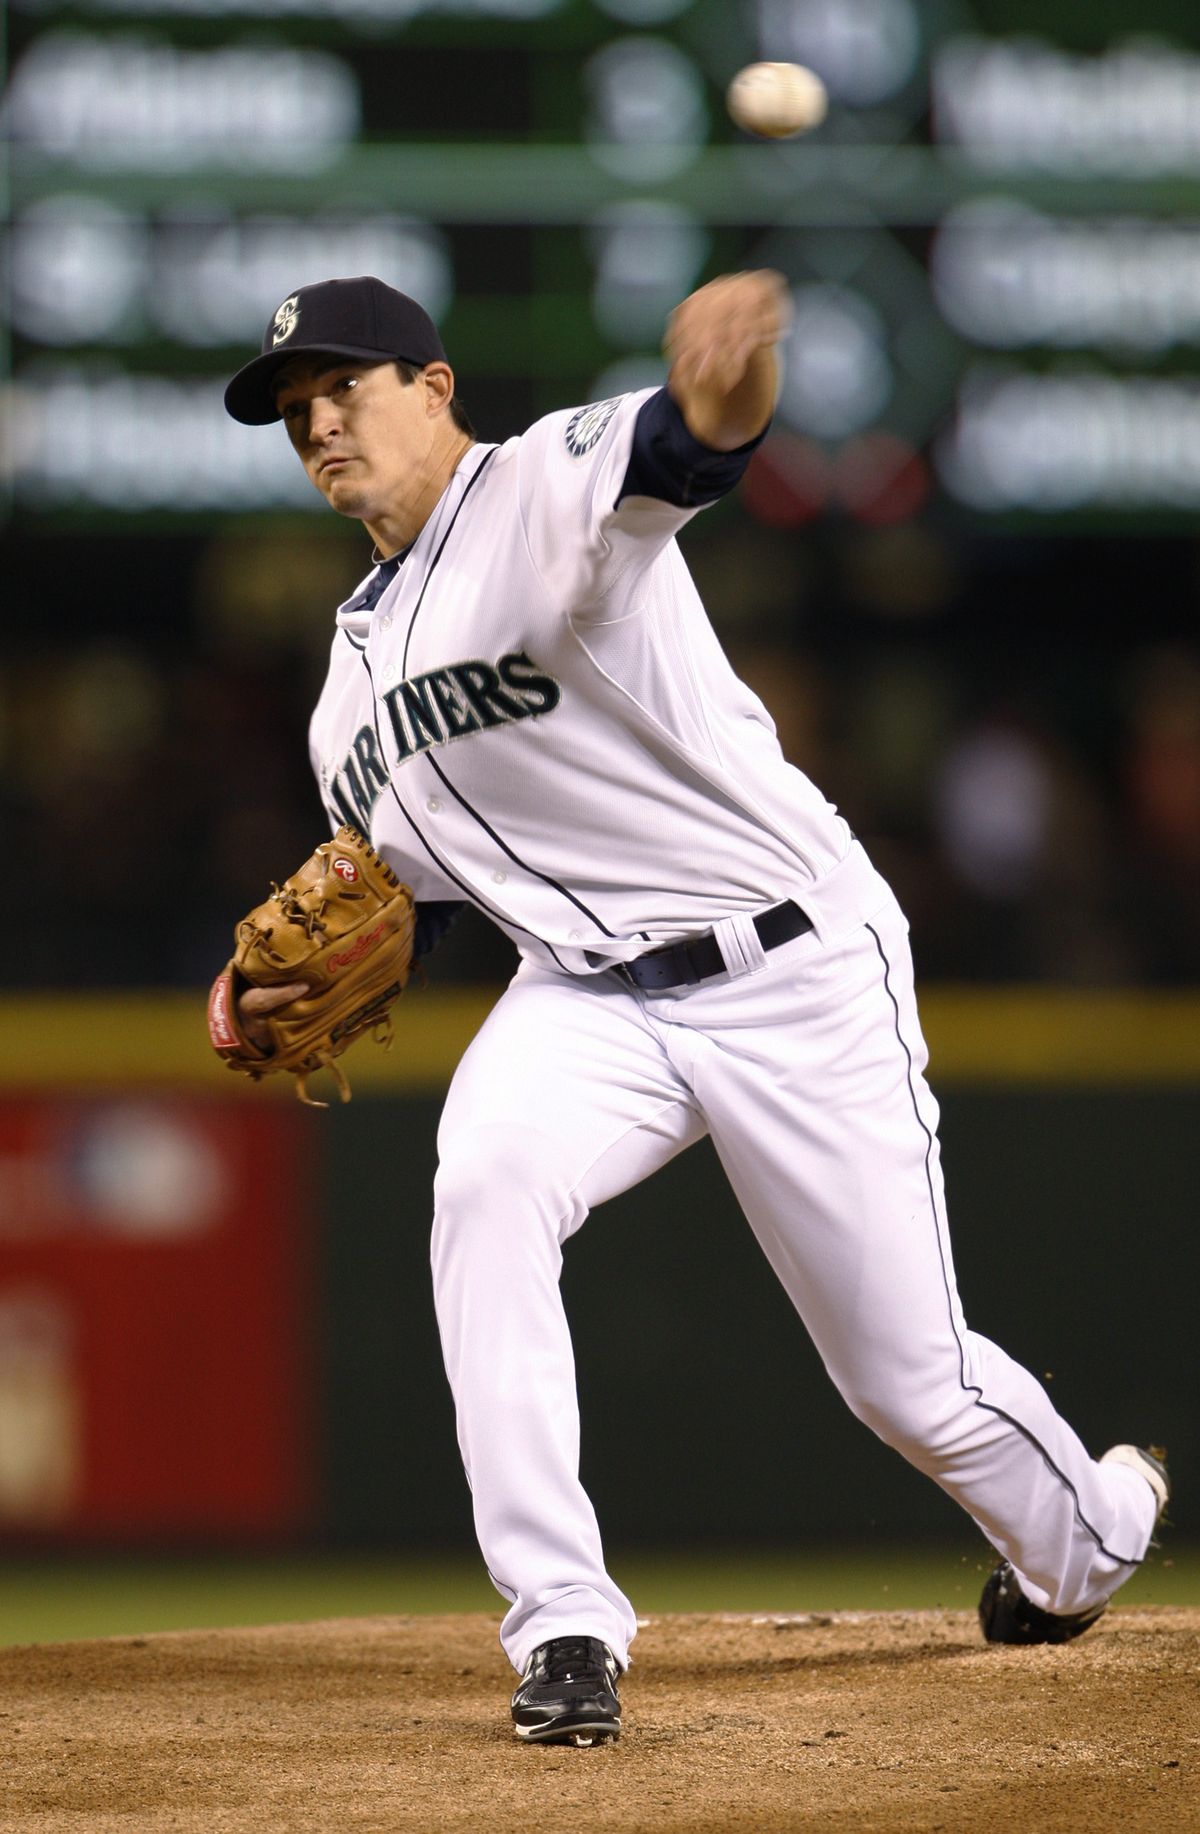 Seattle Mariners starting pitcher Anthony Vasquez throws to the Oakland Athletics in the first inning of a baseball game in Seattle on Wednesday Sept. 28, 2011. (Kevin Casey / Fr132181 Ap)